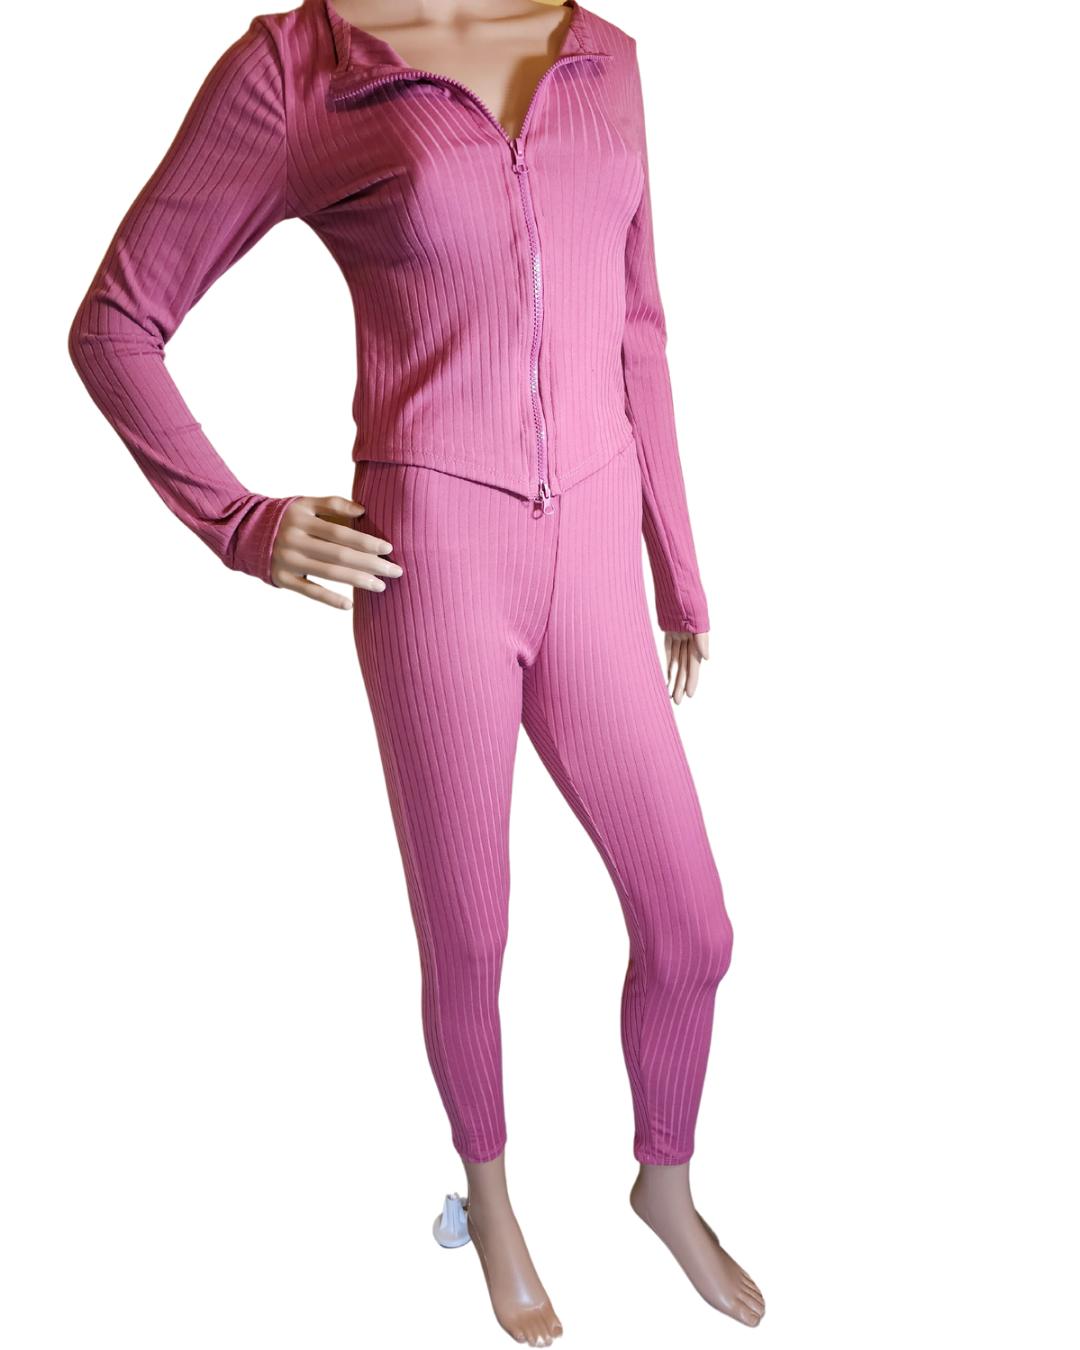 small-large, pink 2pc set. top is a zip top that is versatile. the pants are leggings